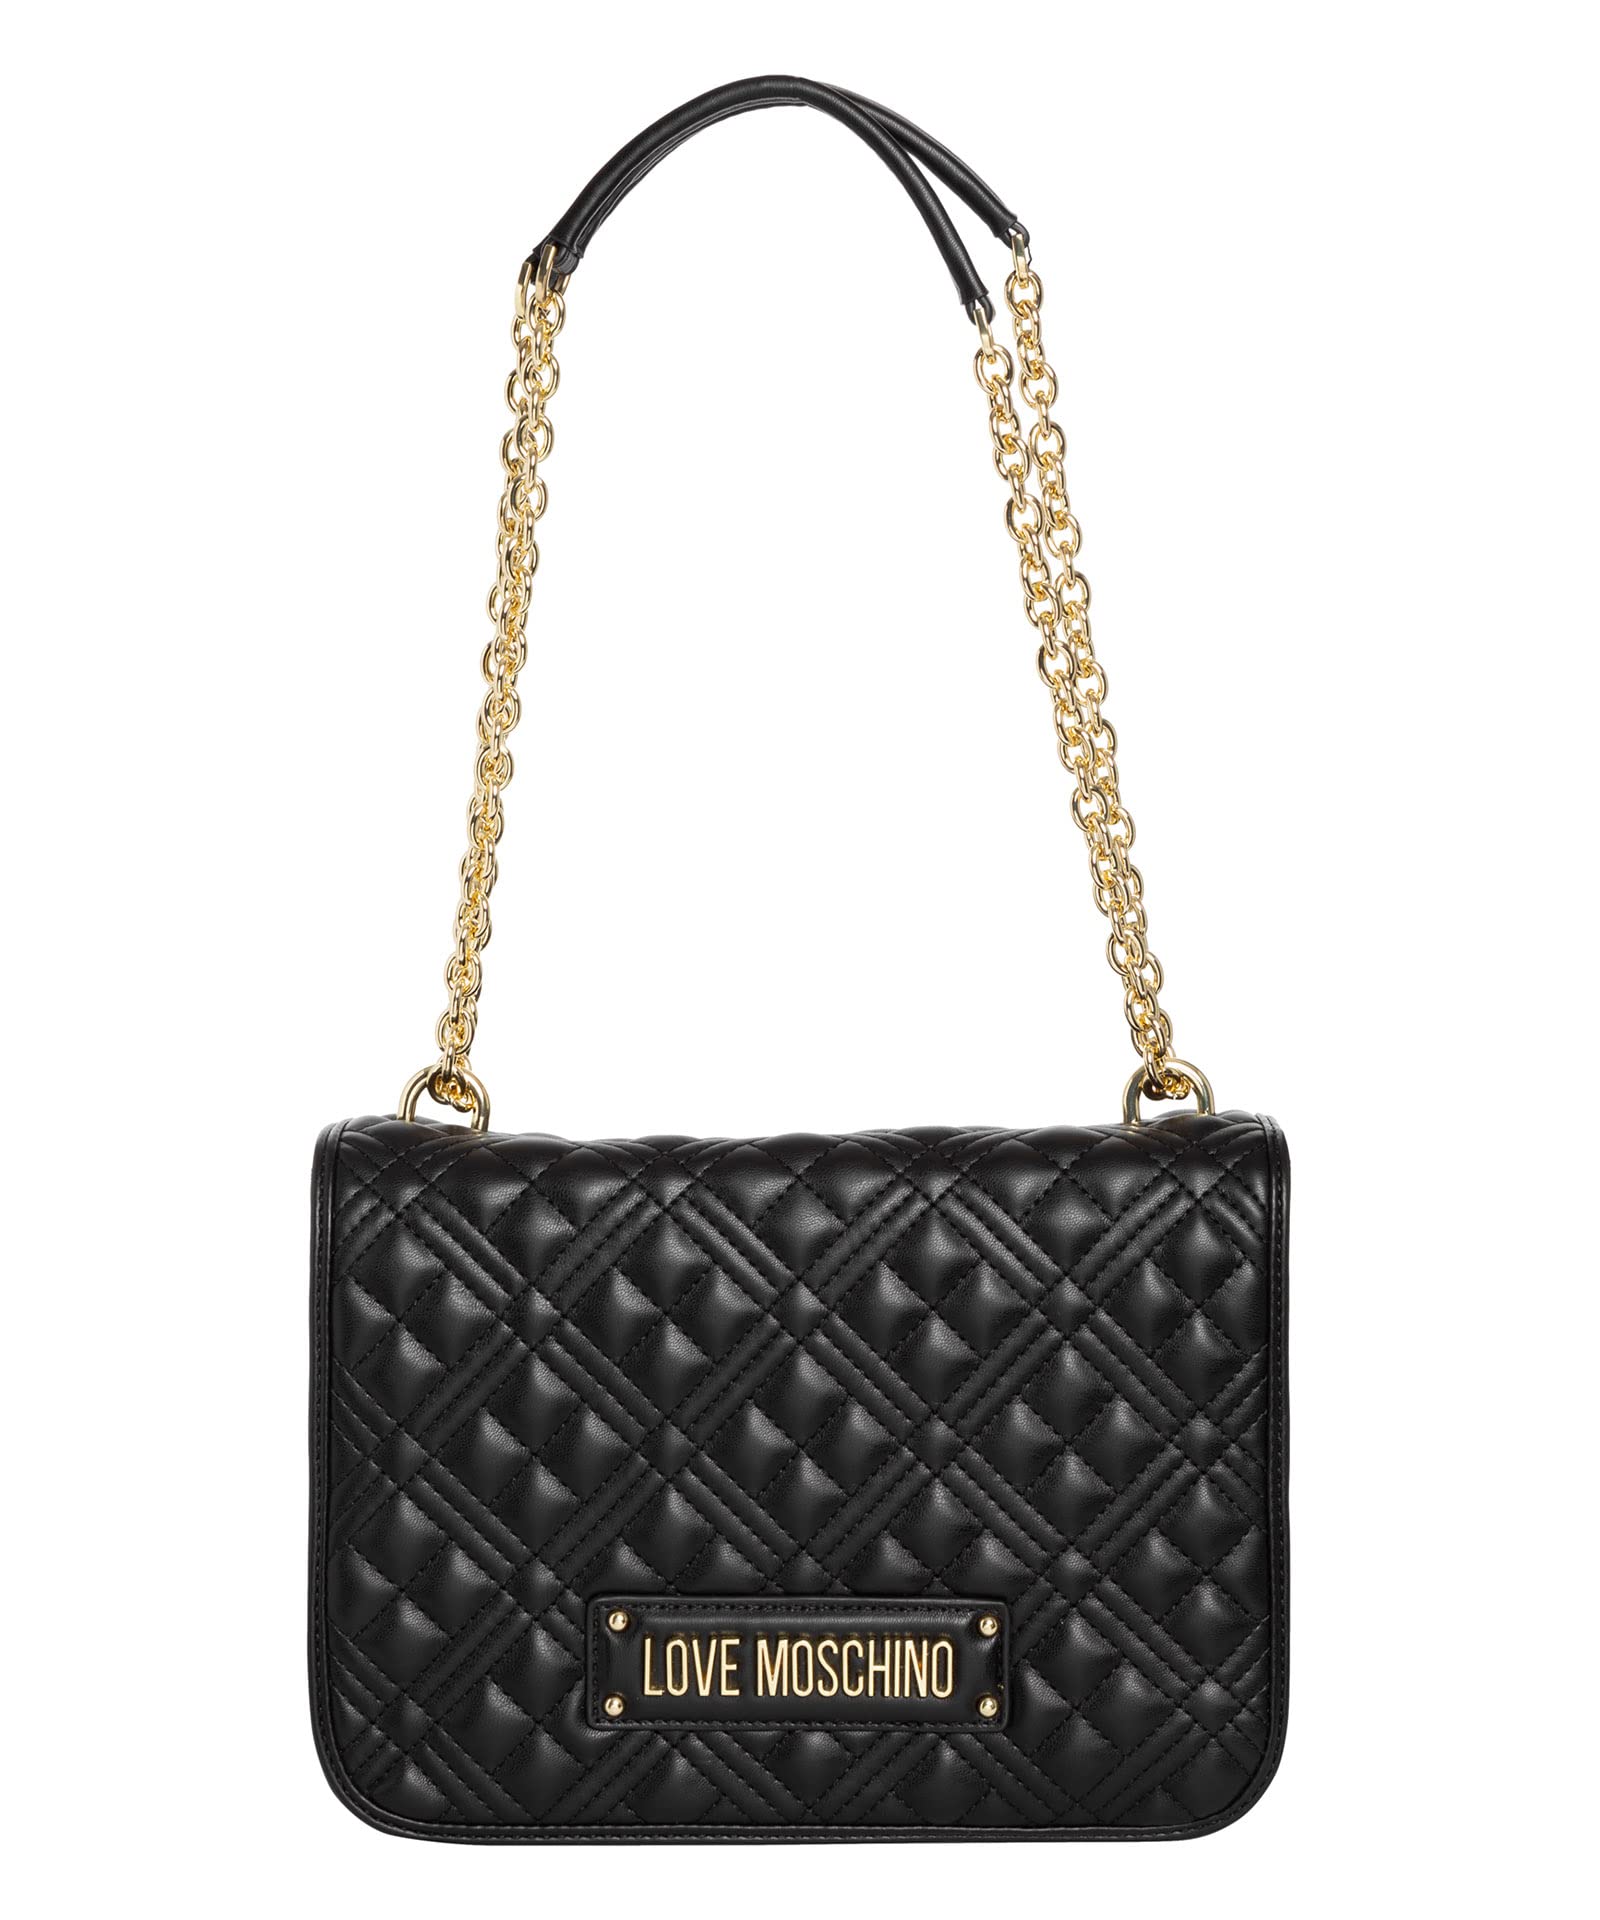 laborsaelite.com has love moschino bags up to 80% off retail! Prices cannot  be beat! We also have FREE FAST ship… | Bags, Designer shoulder bags,  Shoulder bag women